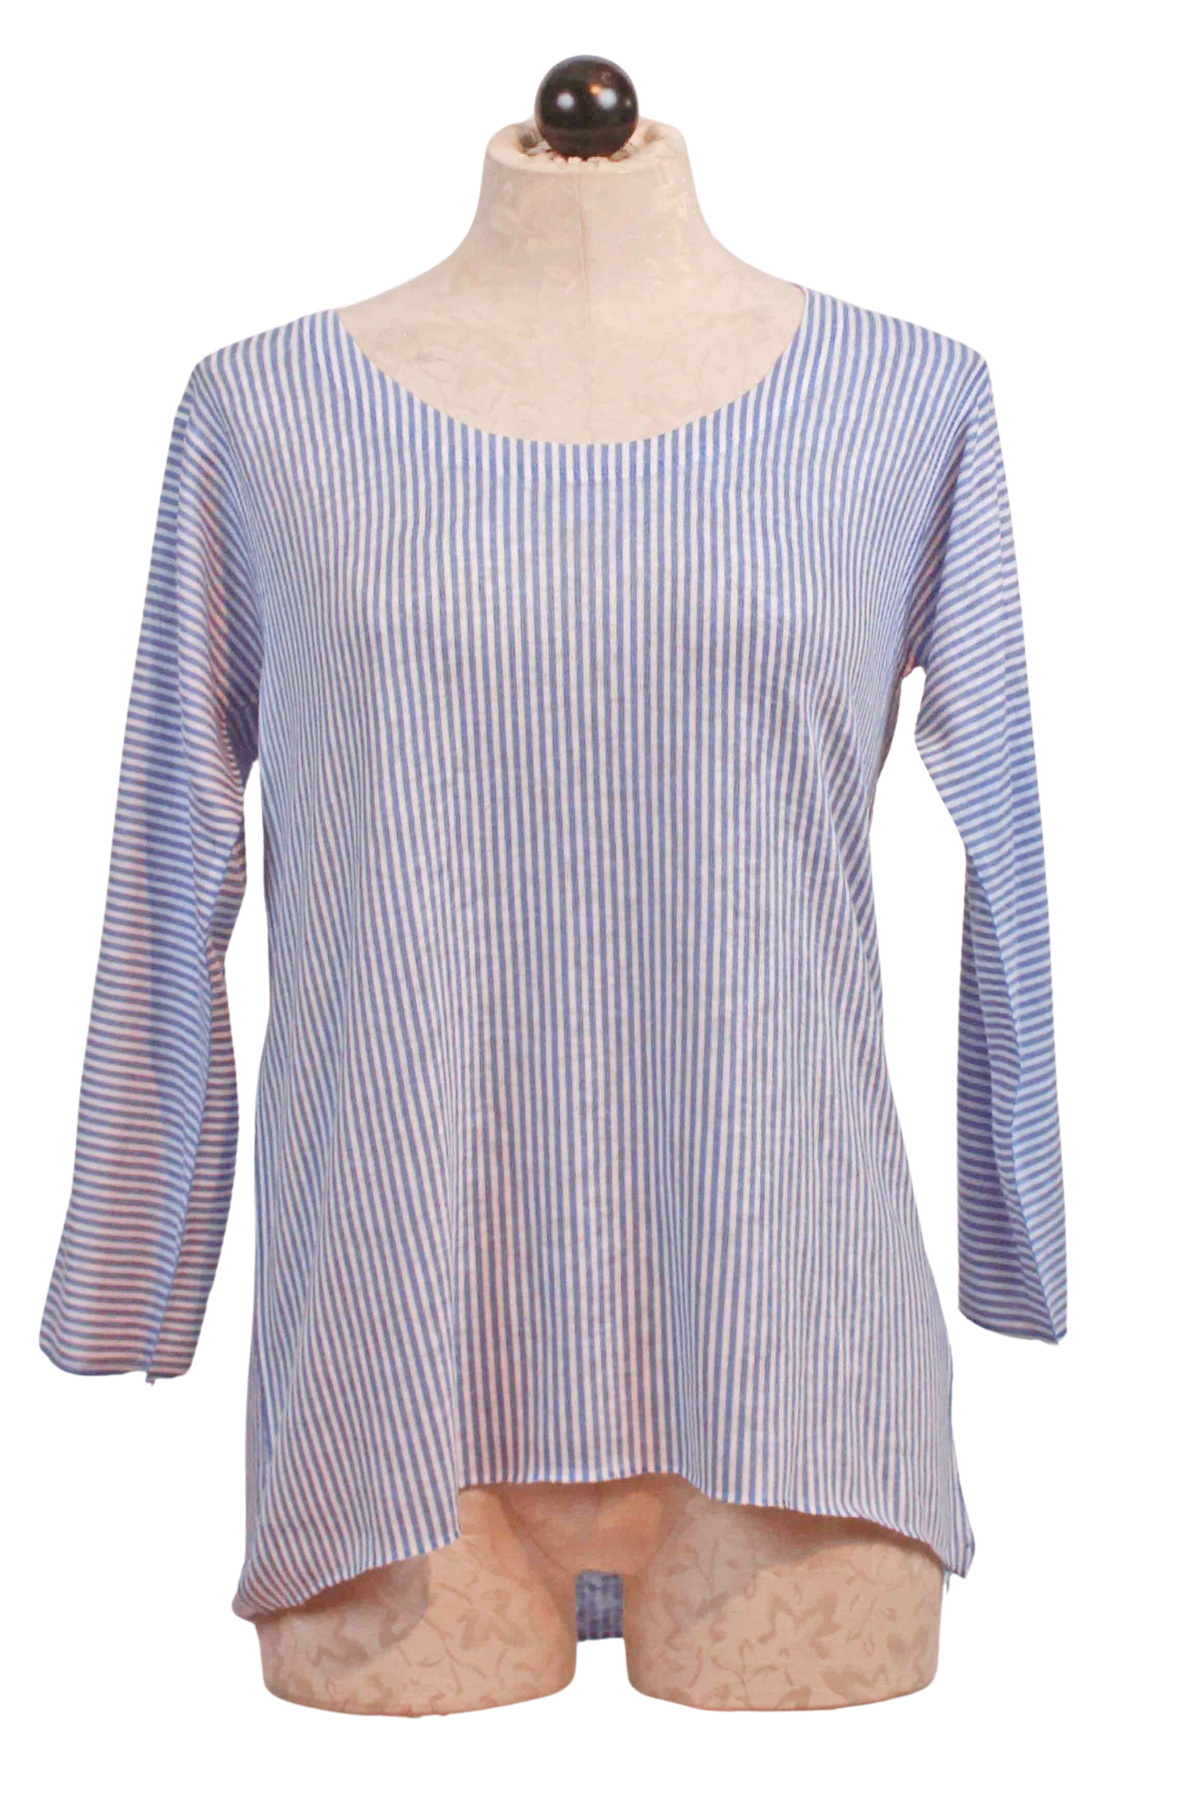 Blue and White Striped Scooped Neck 3/4 Sleeve Top by Nally and Millie